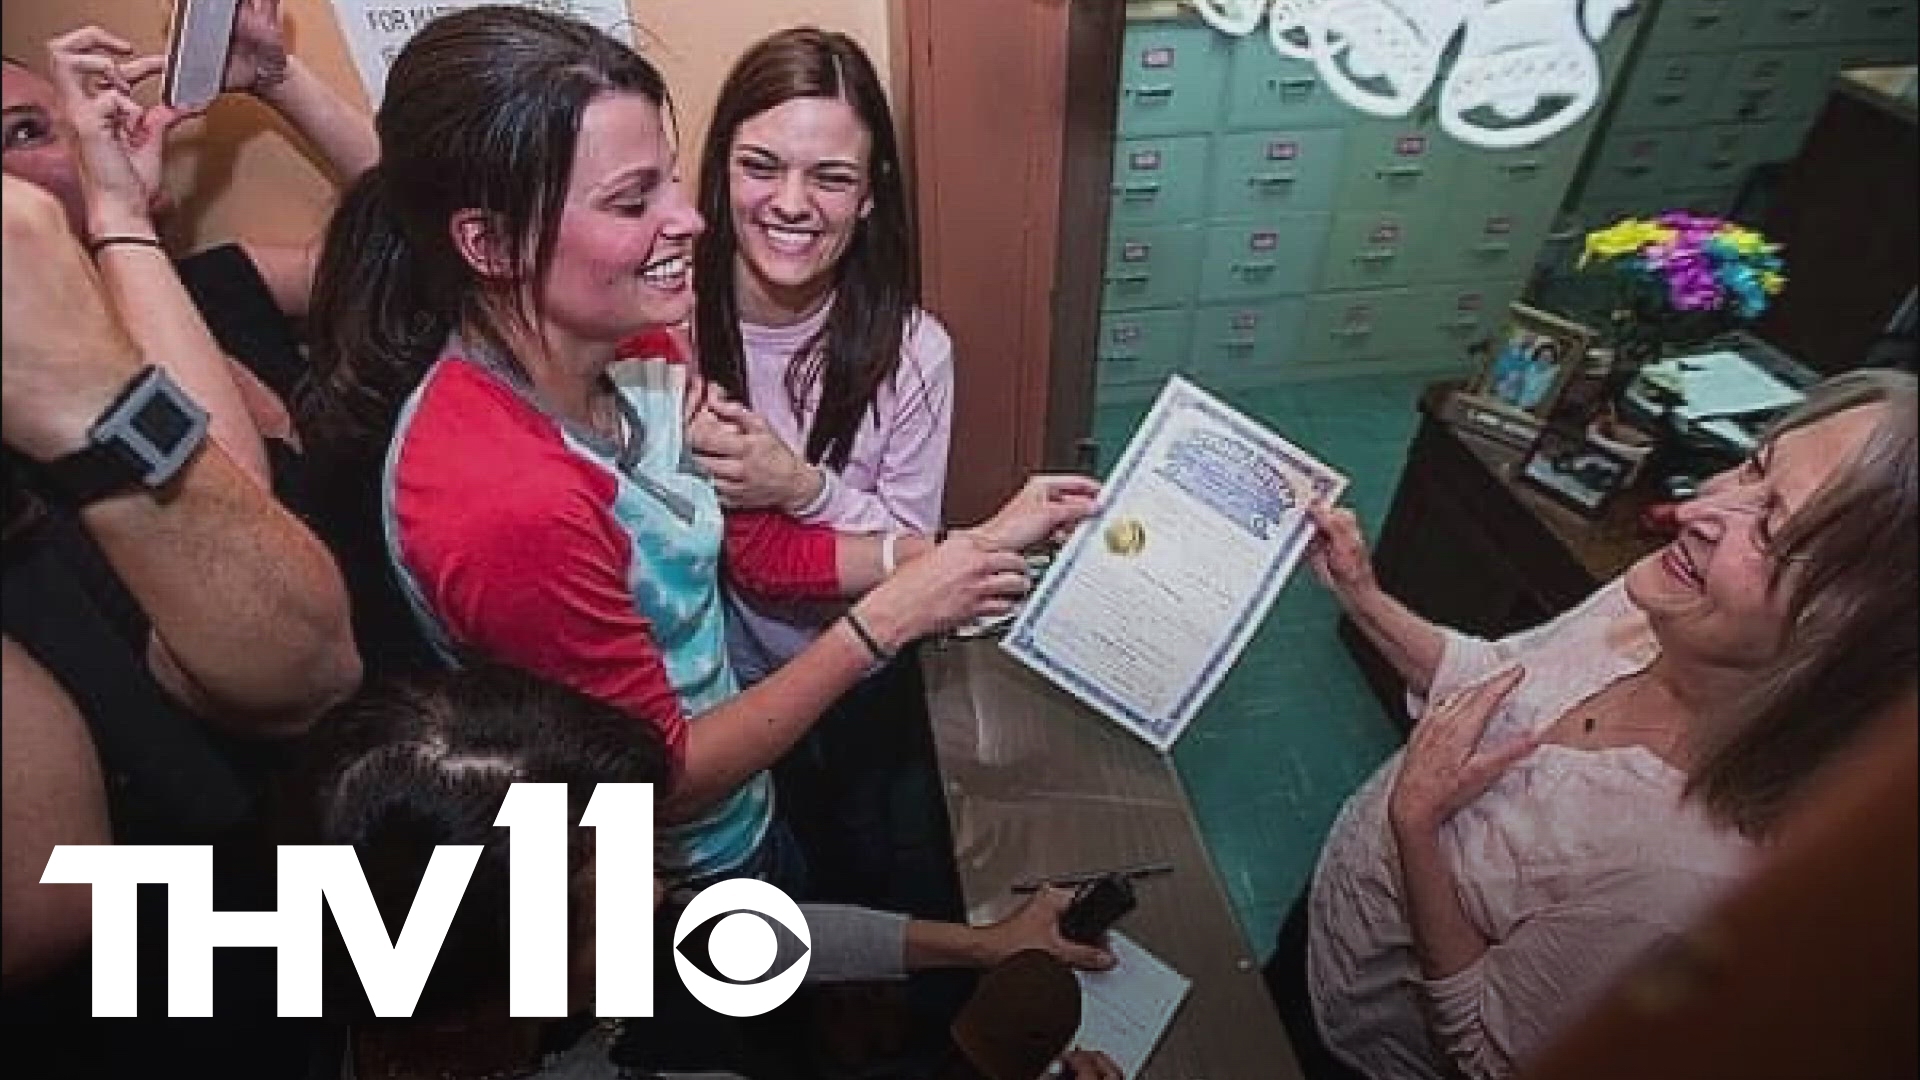 Jennifer and Kristin Seaton-Rambo, the first same-sex couple to be granted a marriage license in Arkansas, reflect on the state's progress ten years later.